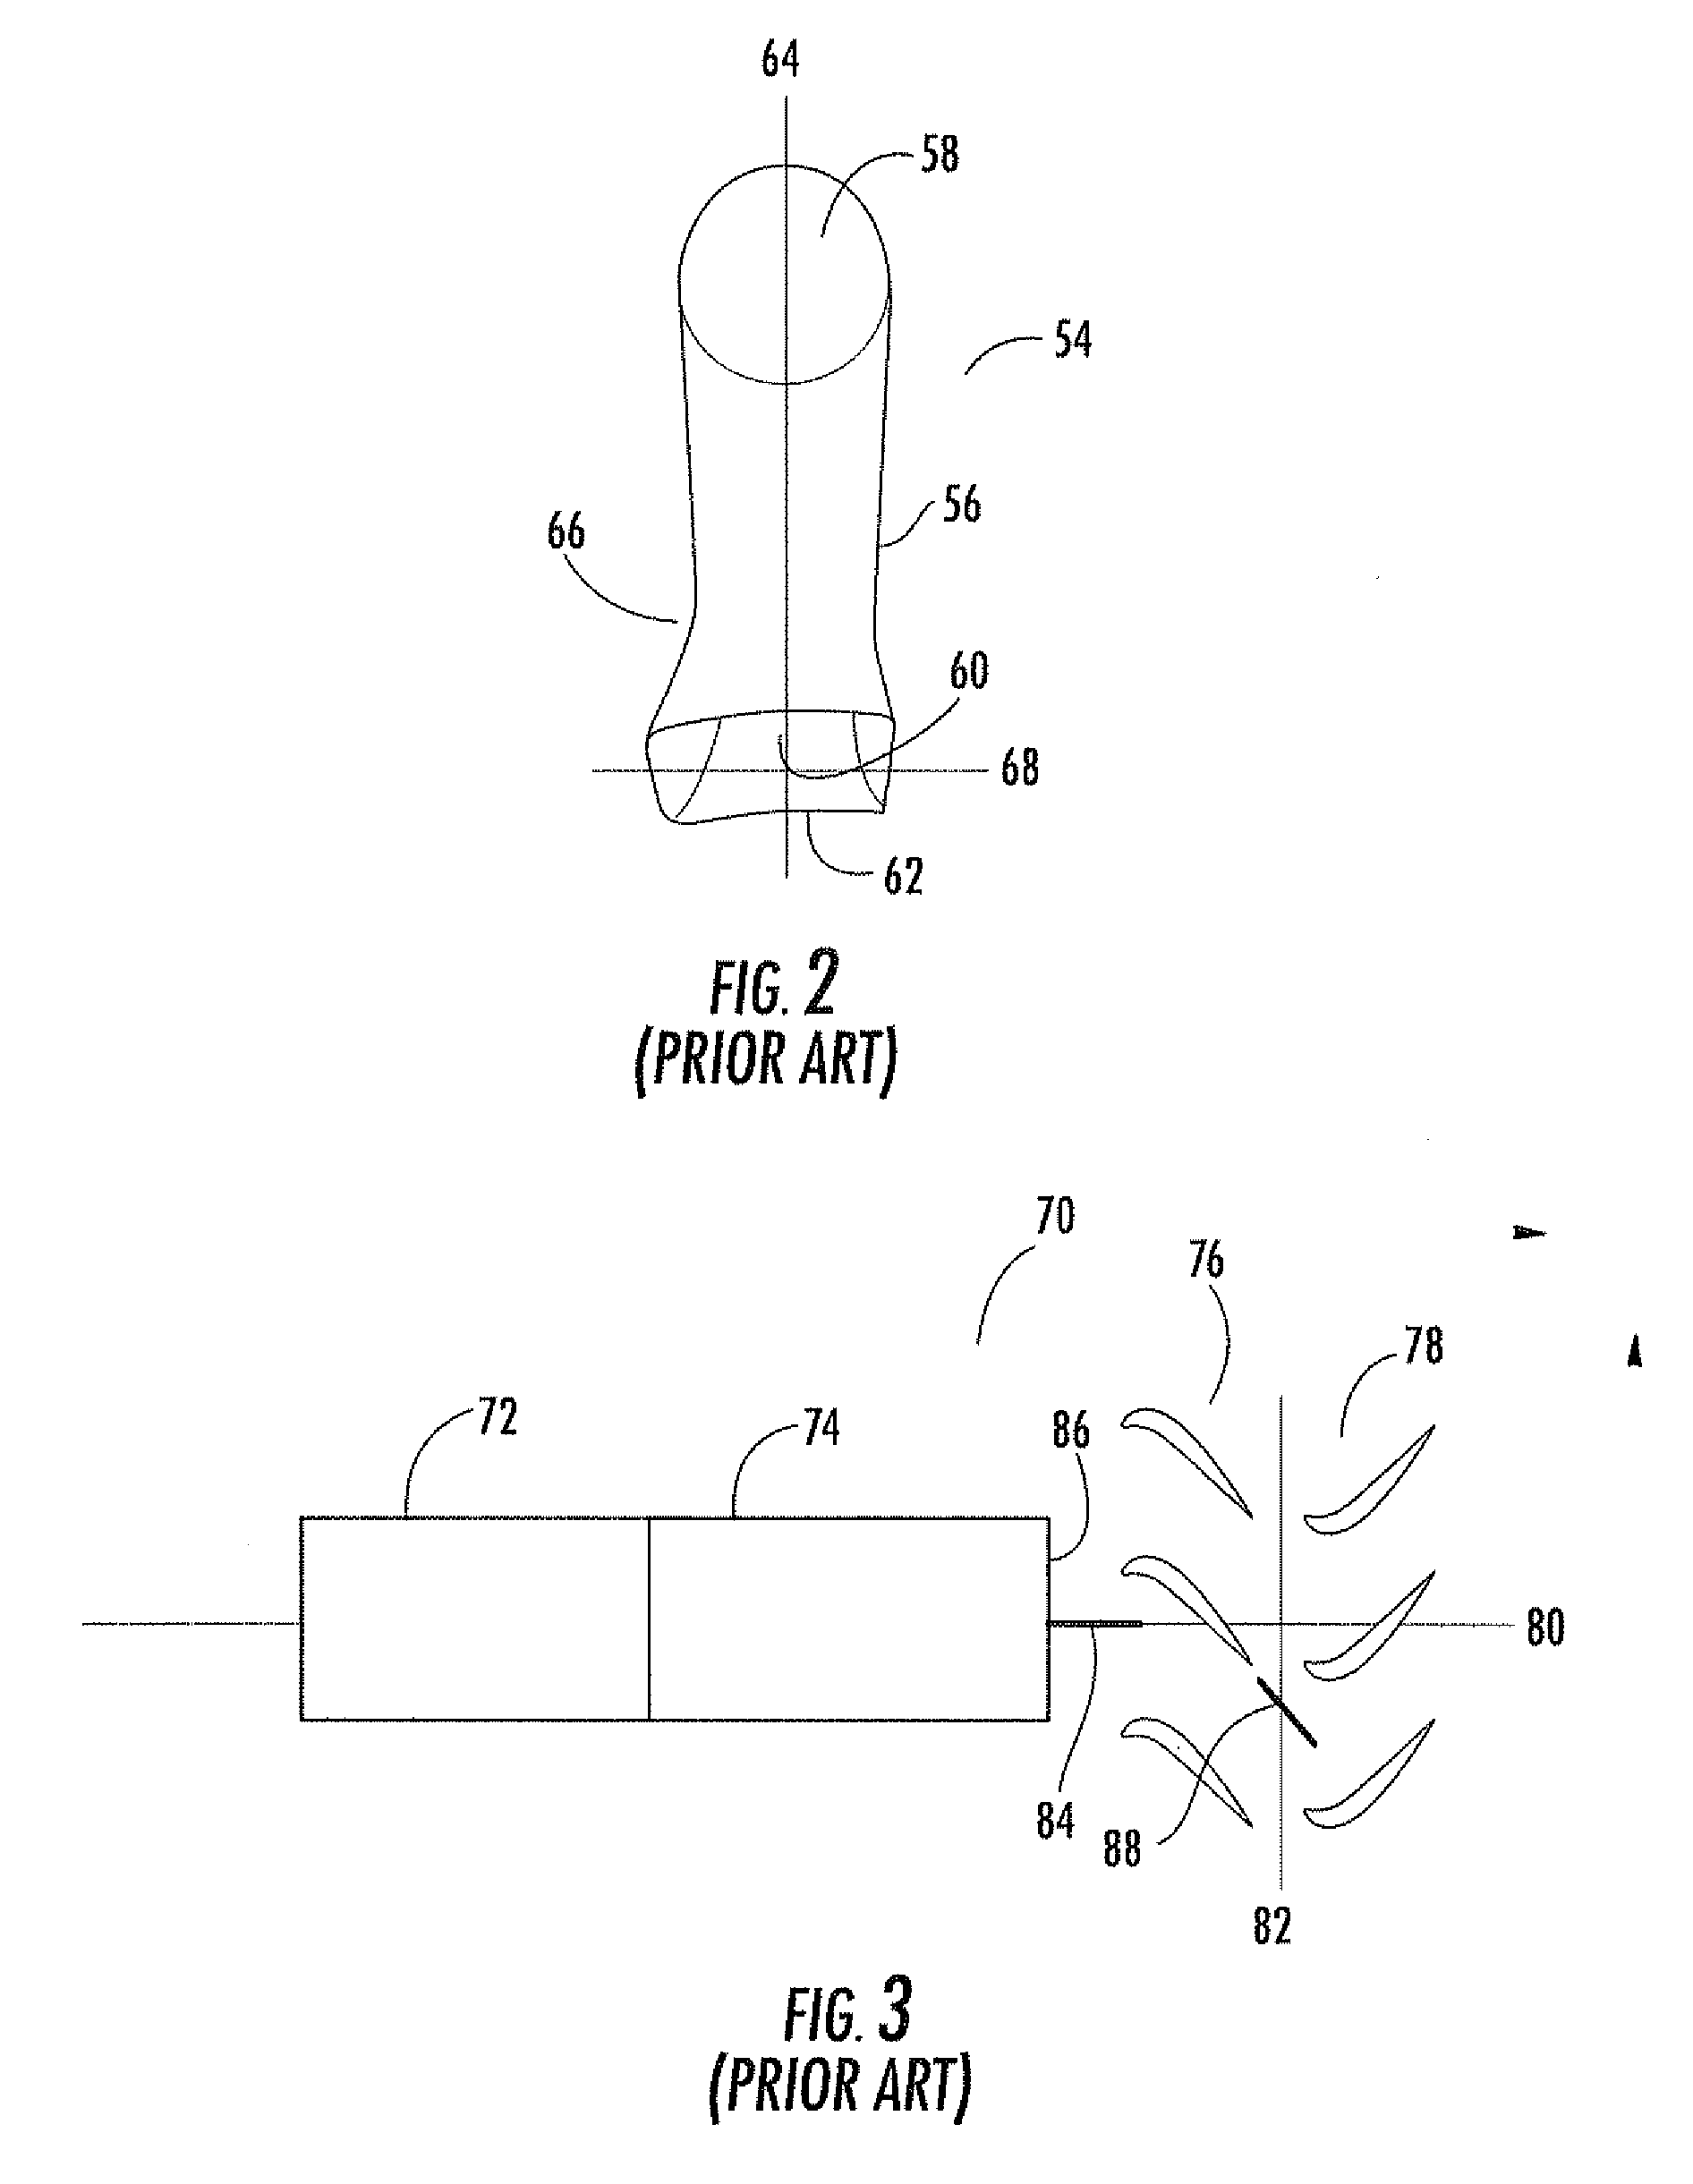 Transition with a linear flow path with exhaust mouths for use in a gas turbine engine